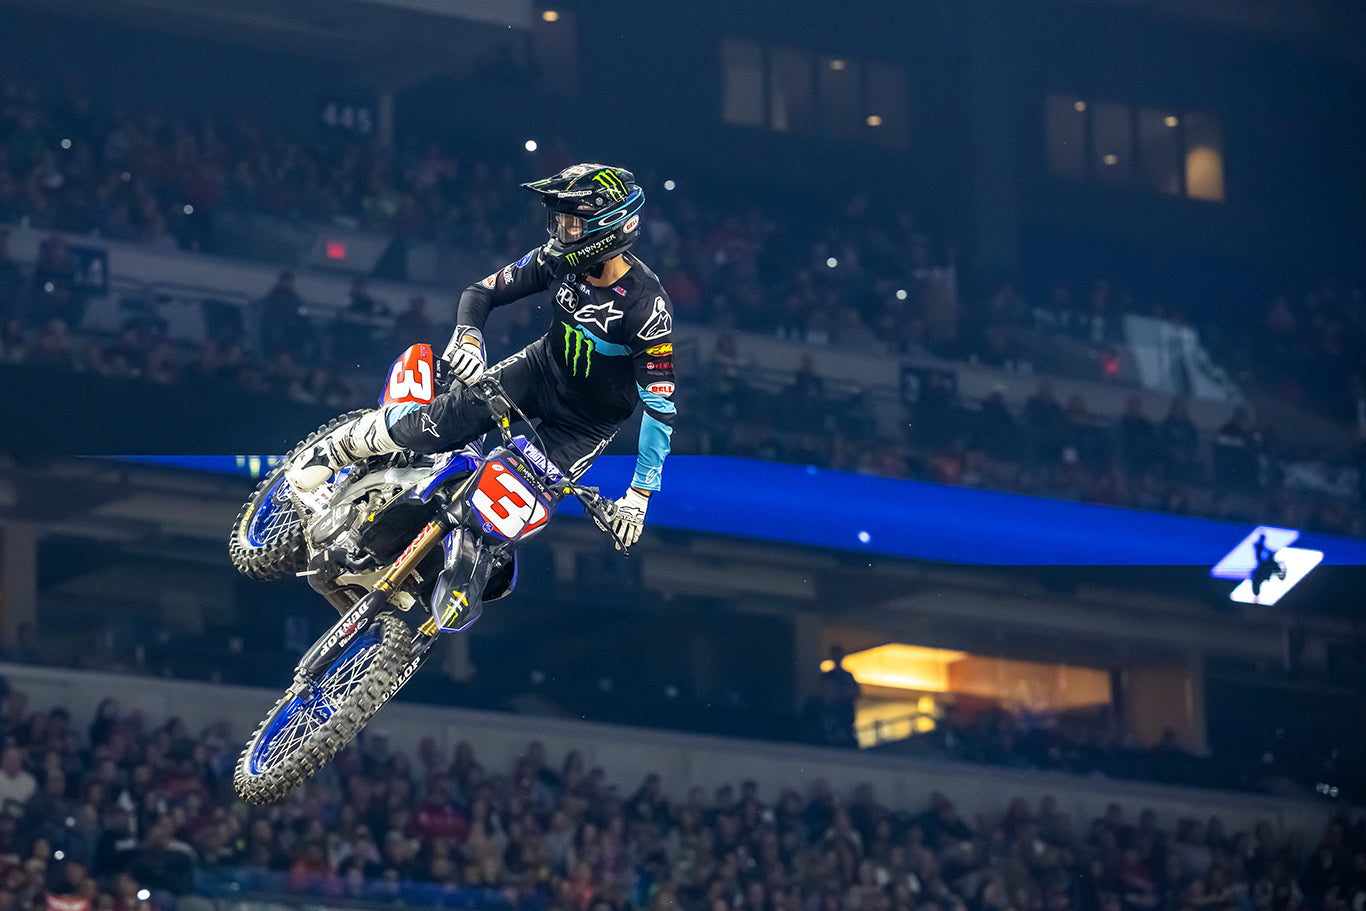 ALPINESTARS TOP SEVEN LOCK-OUT AS ELI TOMAC CONTINUES WINNING STREAK WITH VICTORY IN THE 450SX RACE IN INDIANAPOLIS; JUSTIN BARCIA SECOND, MARVIN MUSQUIN THIRD